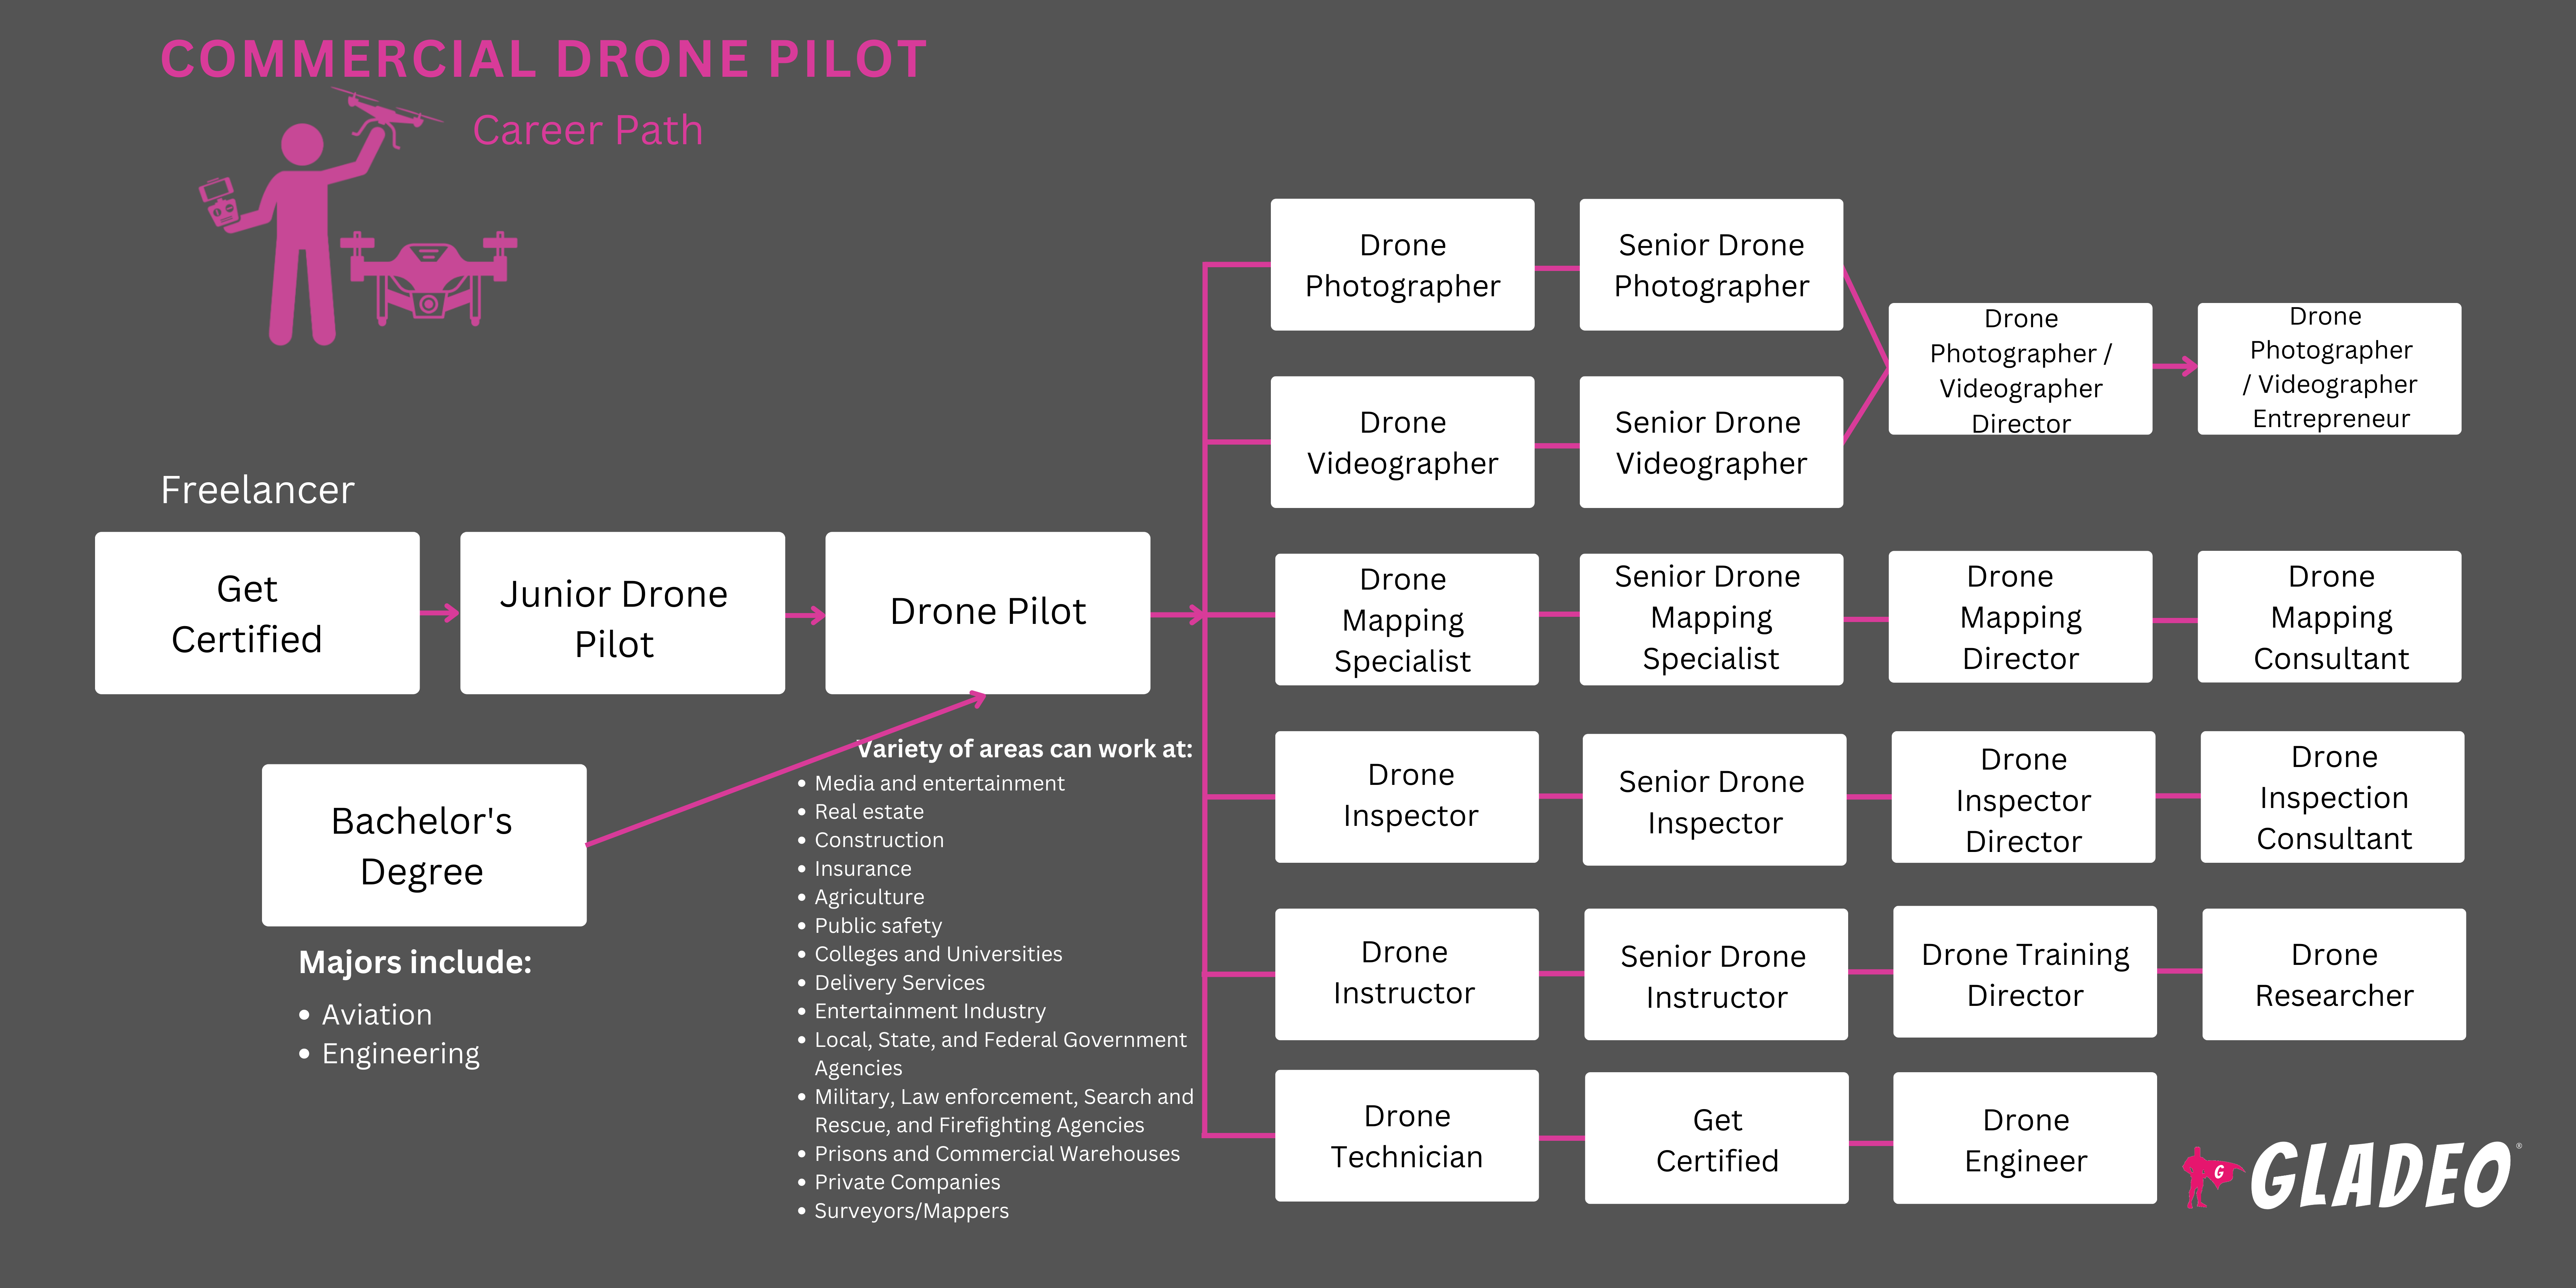 Roadmap ng Commercial Drone Pilot